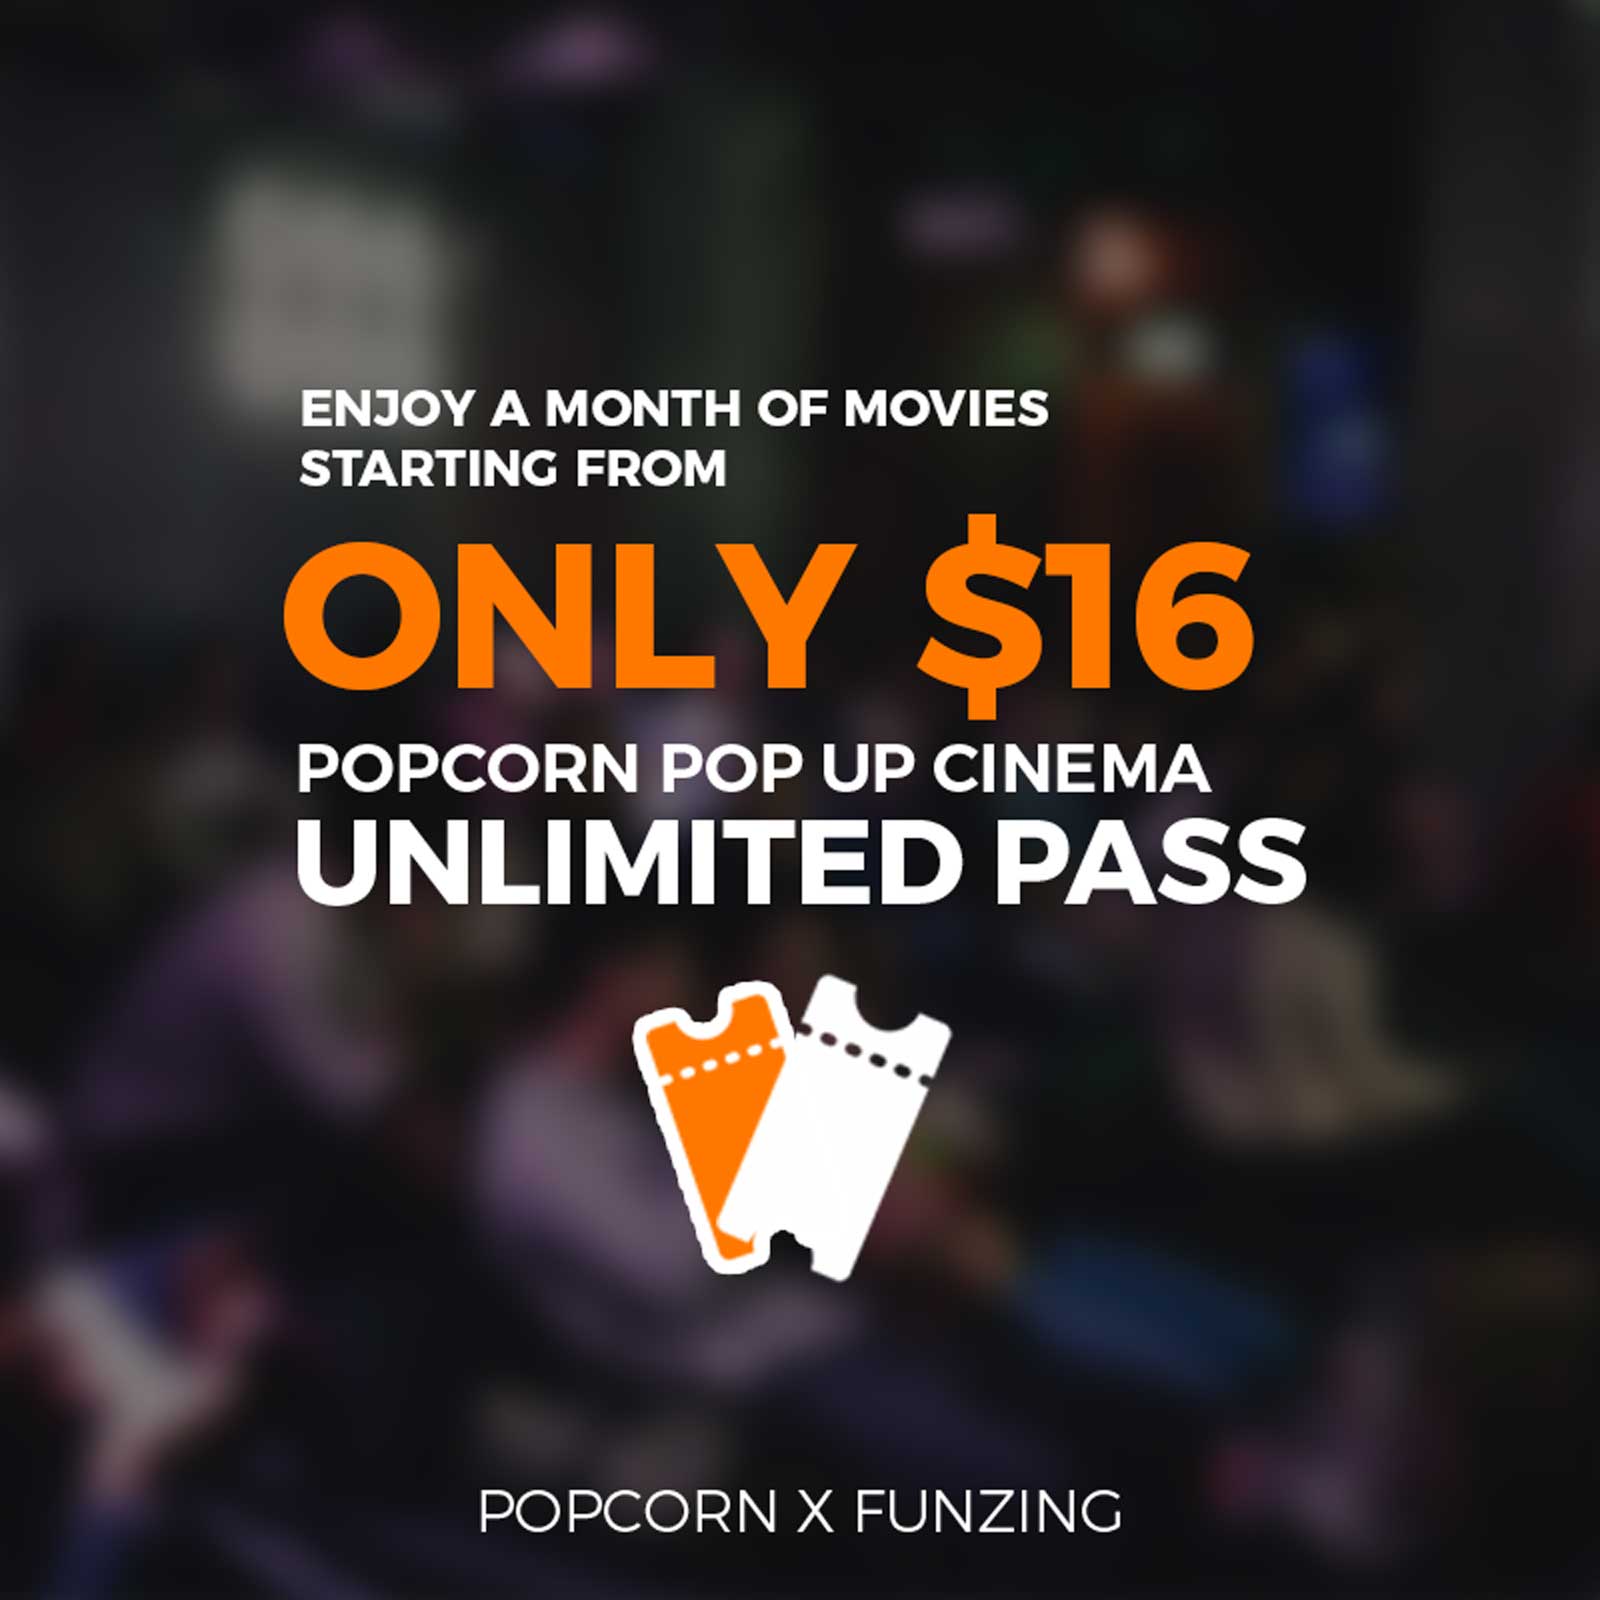 [Exclusive] Popcorn Pop Up Cinema - Enjoy A Month Of Movies From Just $16!